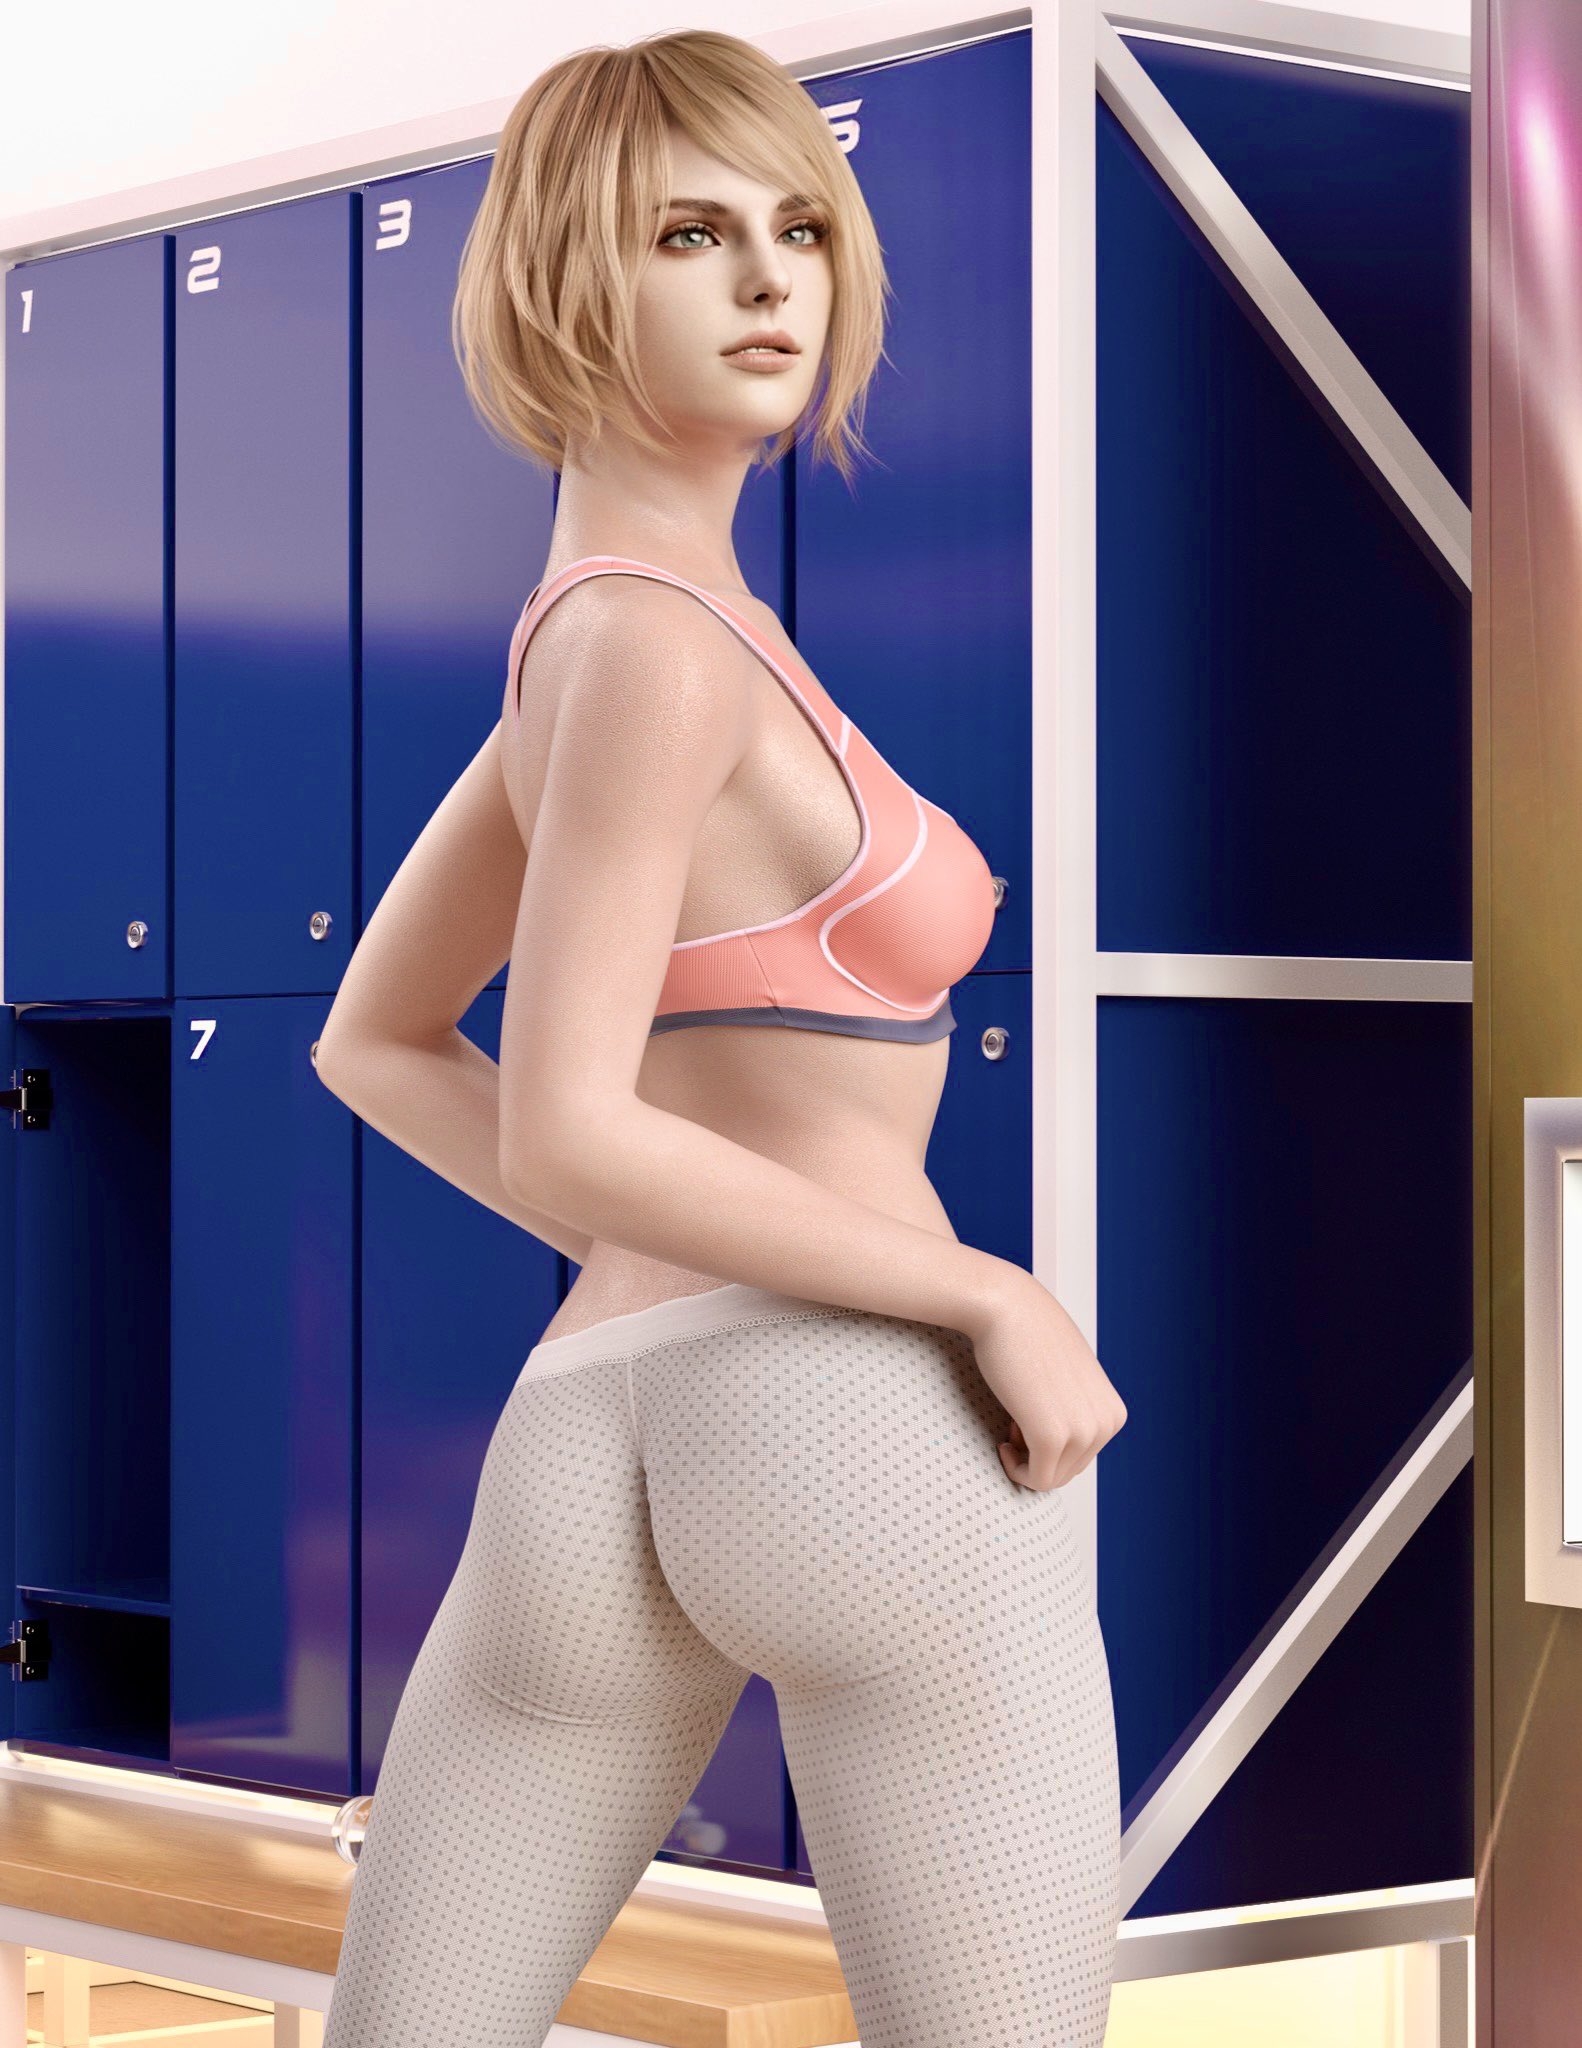 Ashley Graham at the gym part 1 Ashley Graham Resident Evil Resident Evil 4 Remake Blonde Blond Hair Sexy Blonde Gym Gym Clothes Stripping Leggings Bra Thong Thong Panties Panties Nipples Pink Nipples Breasts Small Breasts Small Boobs Small Tits Horny Posing 3d Girl Girl 1girl Workout 3d Porn 3dnsfw Rule34 Rule 34 Pinup Cute 2